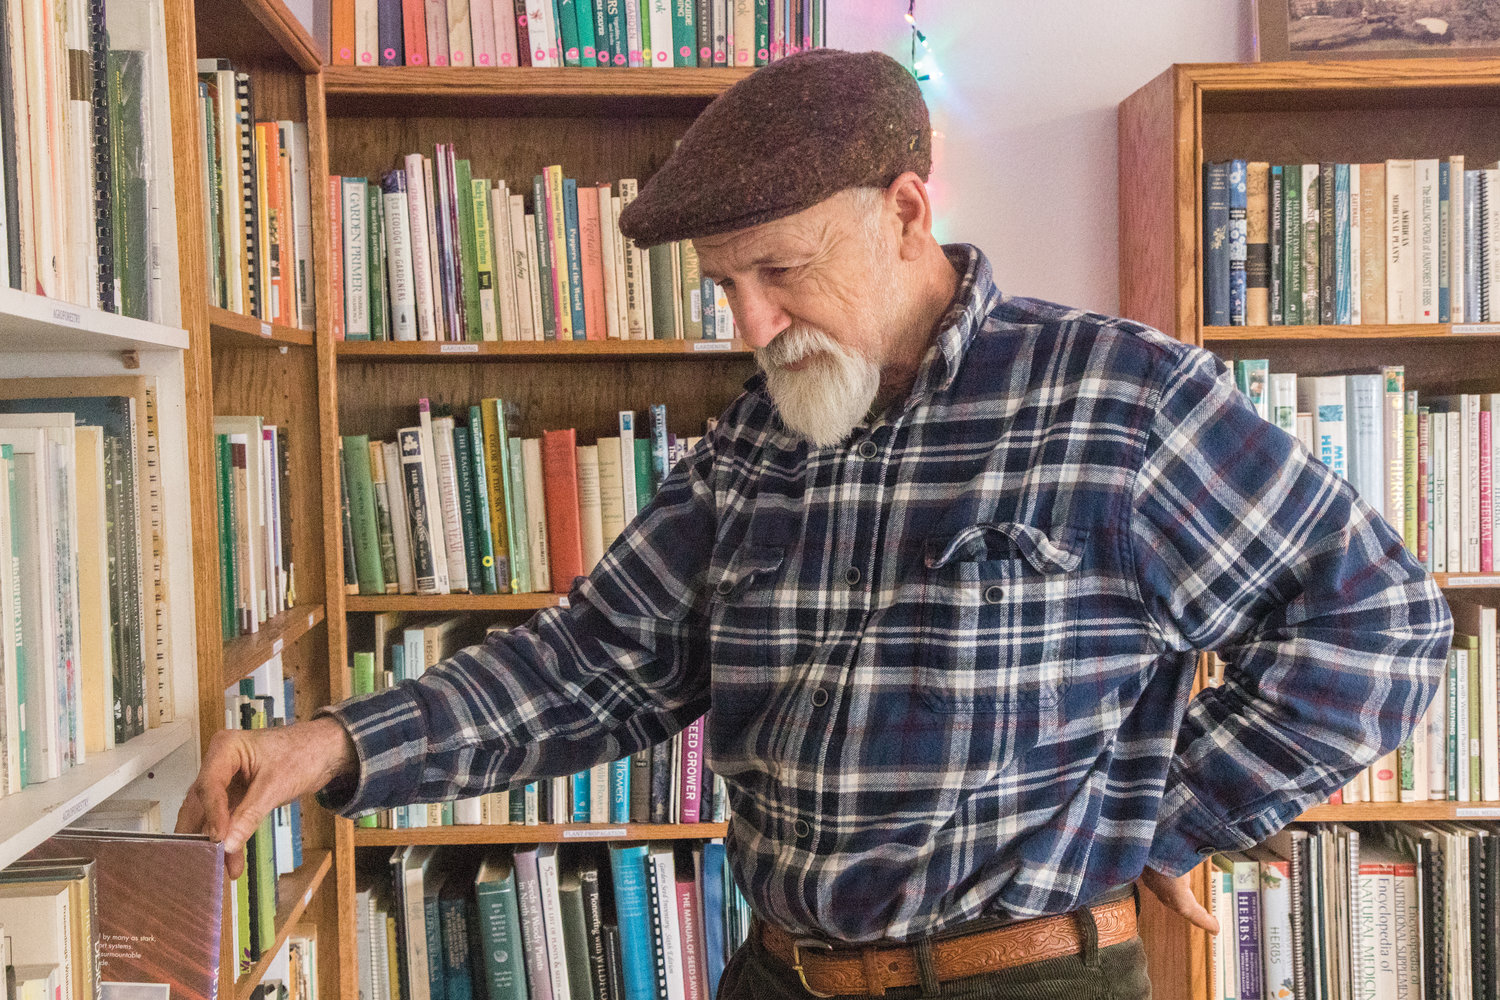 Michael Pilarski, a farmer and advocate for regenerative agriculture, has opened a reference library of books on farming practices, plants, trees, climate and more.